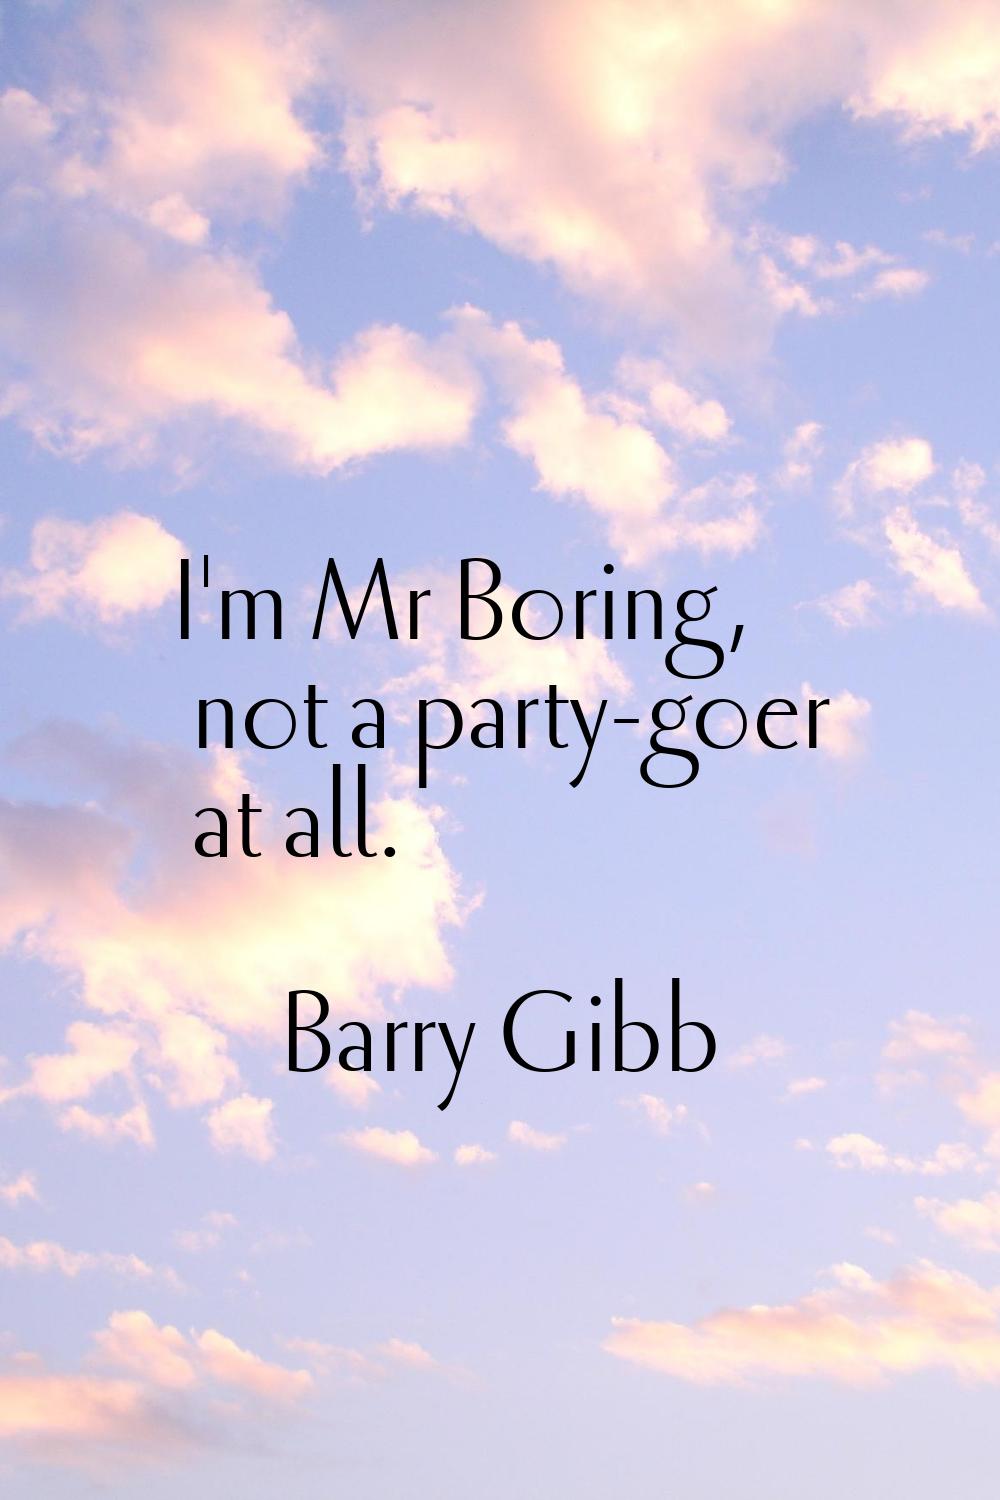 I'm Mr Boring, not a party-goer at all.